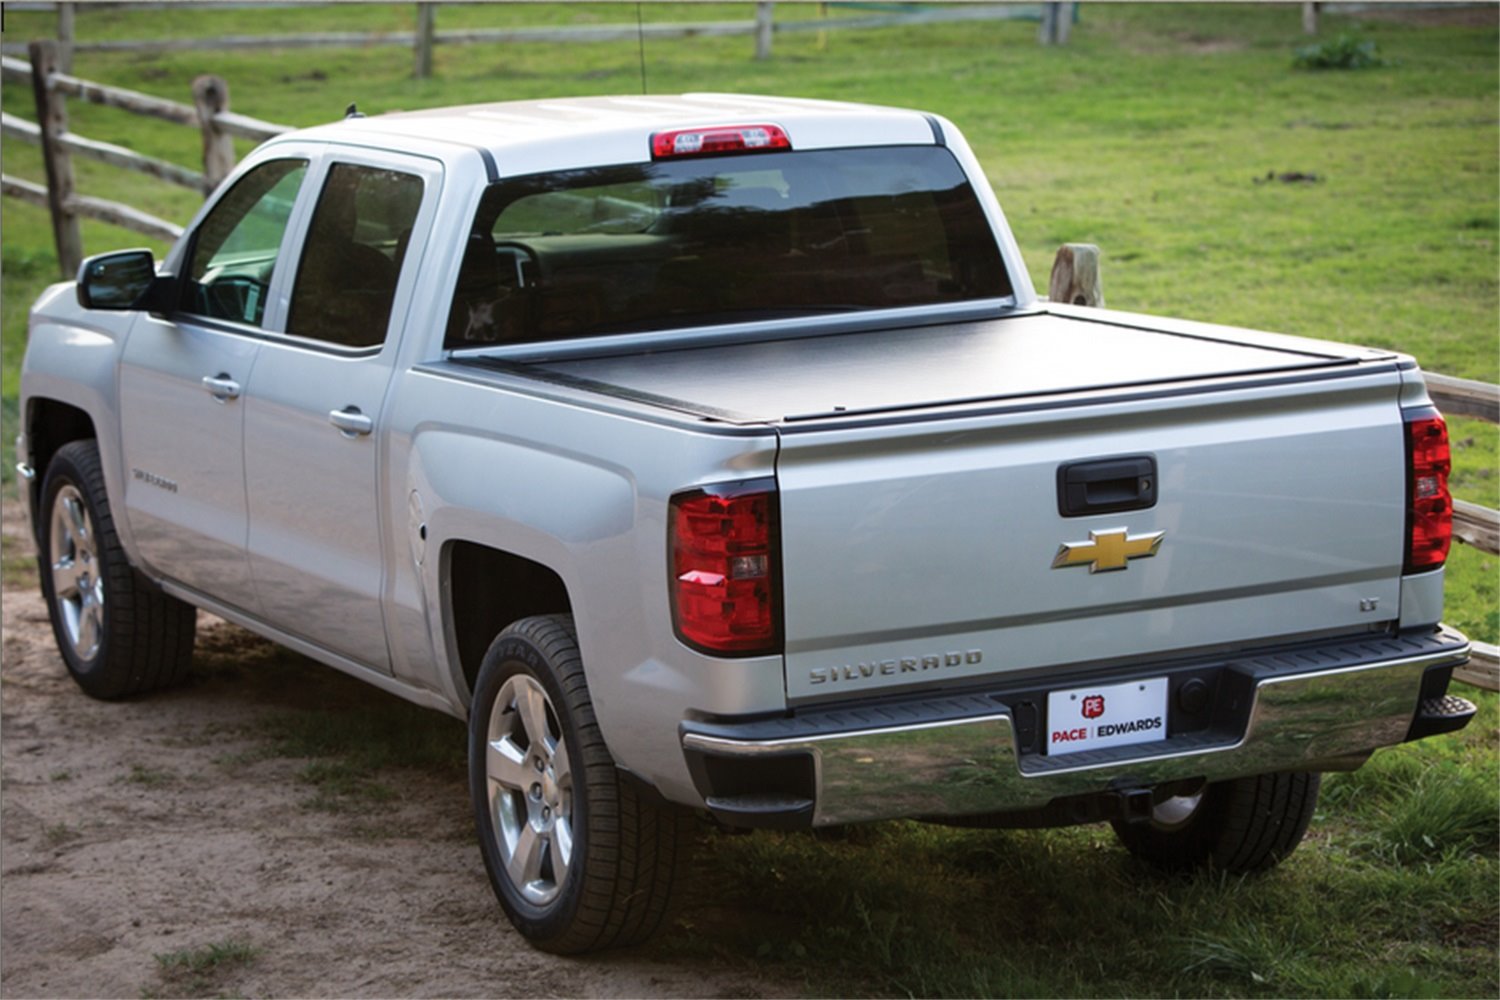 JRF172 Jackrabbit Tonneau Cover Kit for 2021-2023 Ford F-150